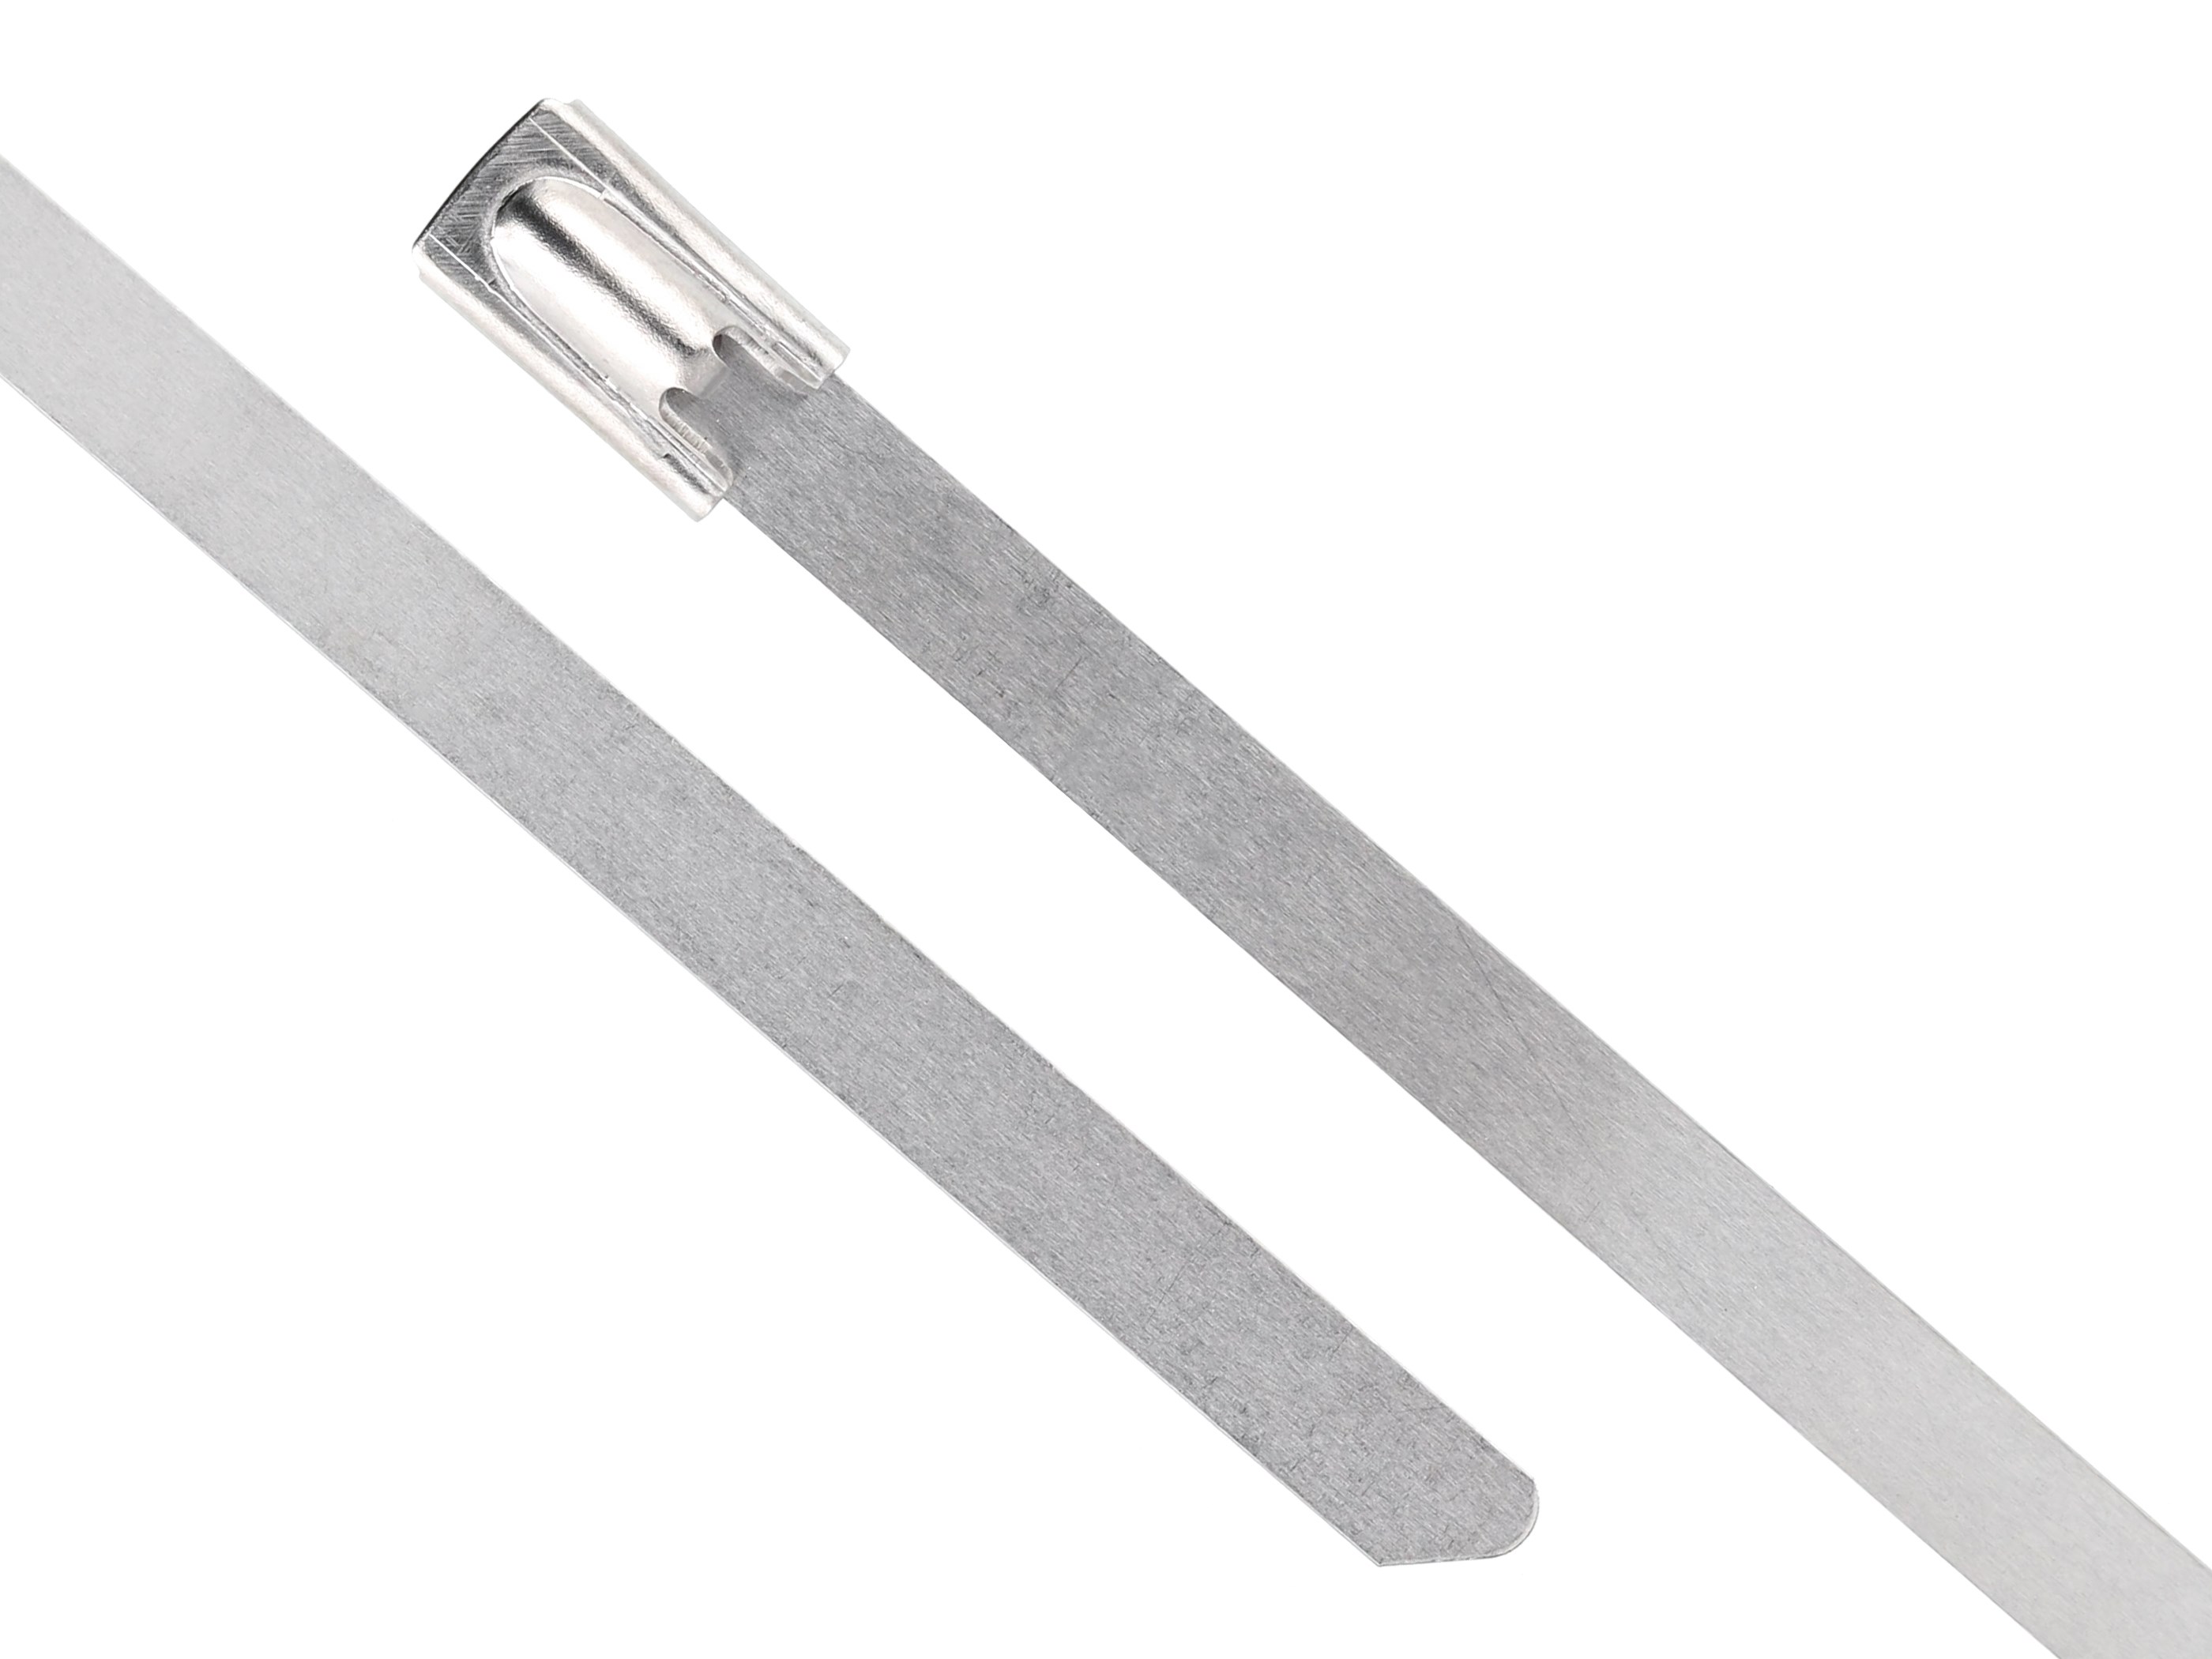 PACK OF 10 Commercial Stainless Steel Cable Tie 11 inch 100 lb Electrical Wiring 